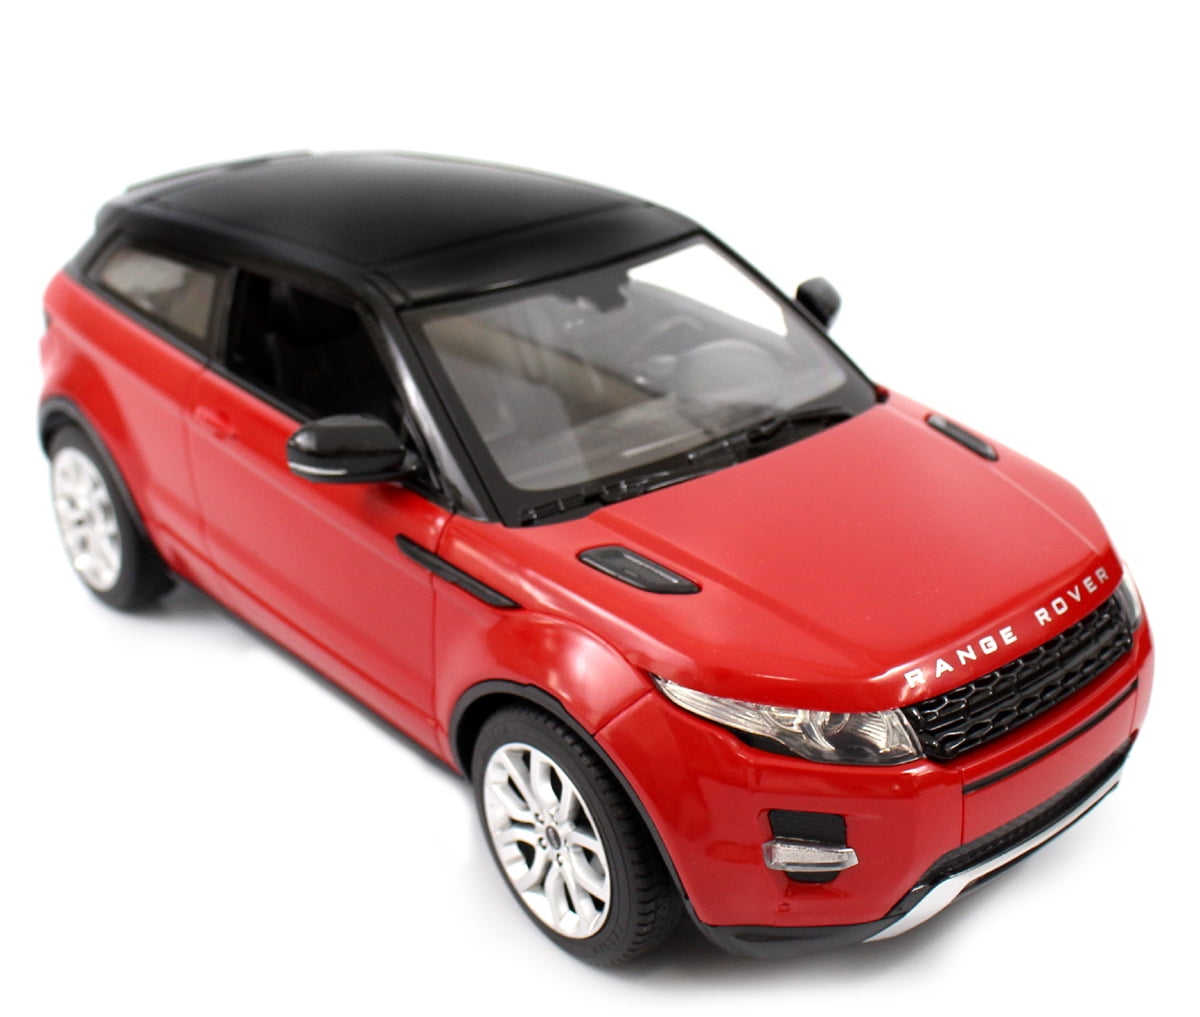 Remote Control Range Rover Vogue RED 1:24 Scale Car 4x4 Toy Gift Present Xmas 